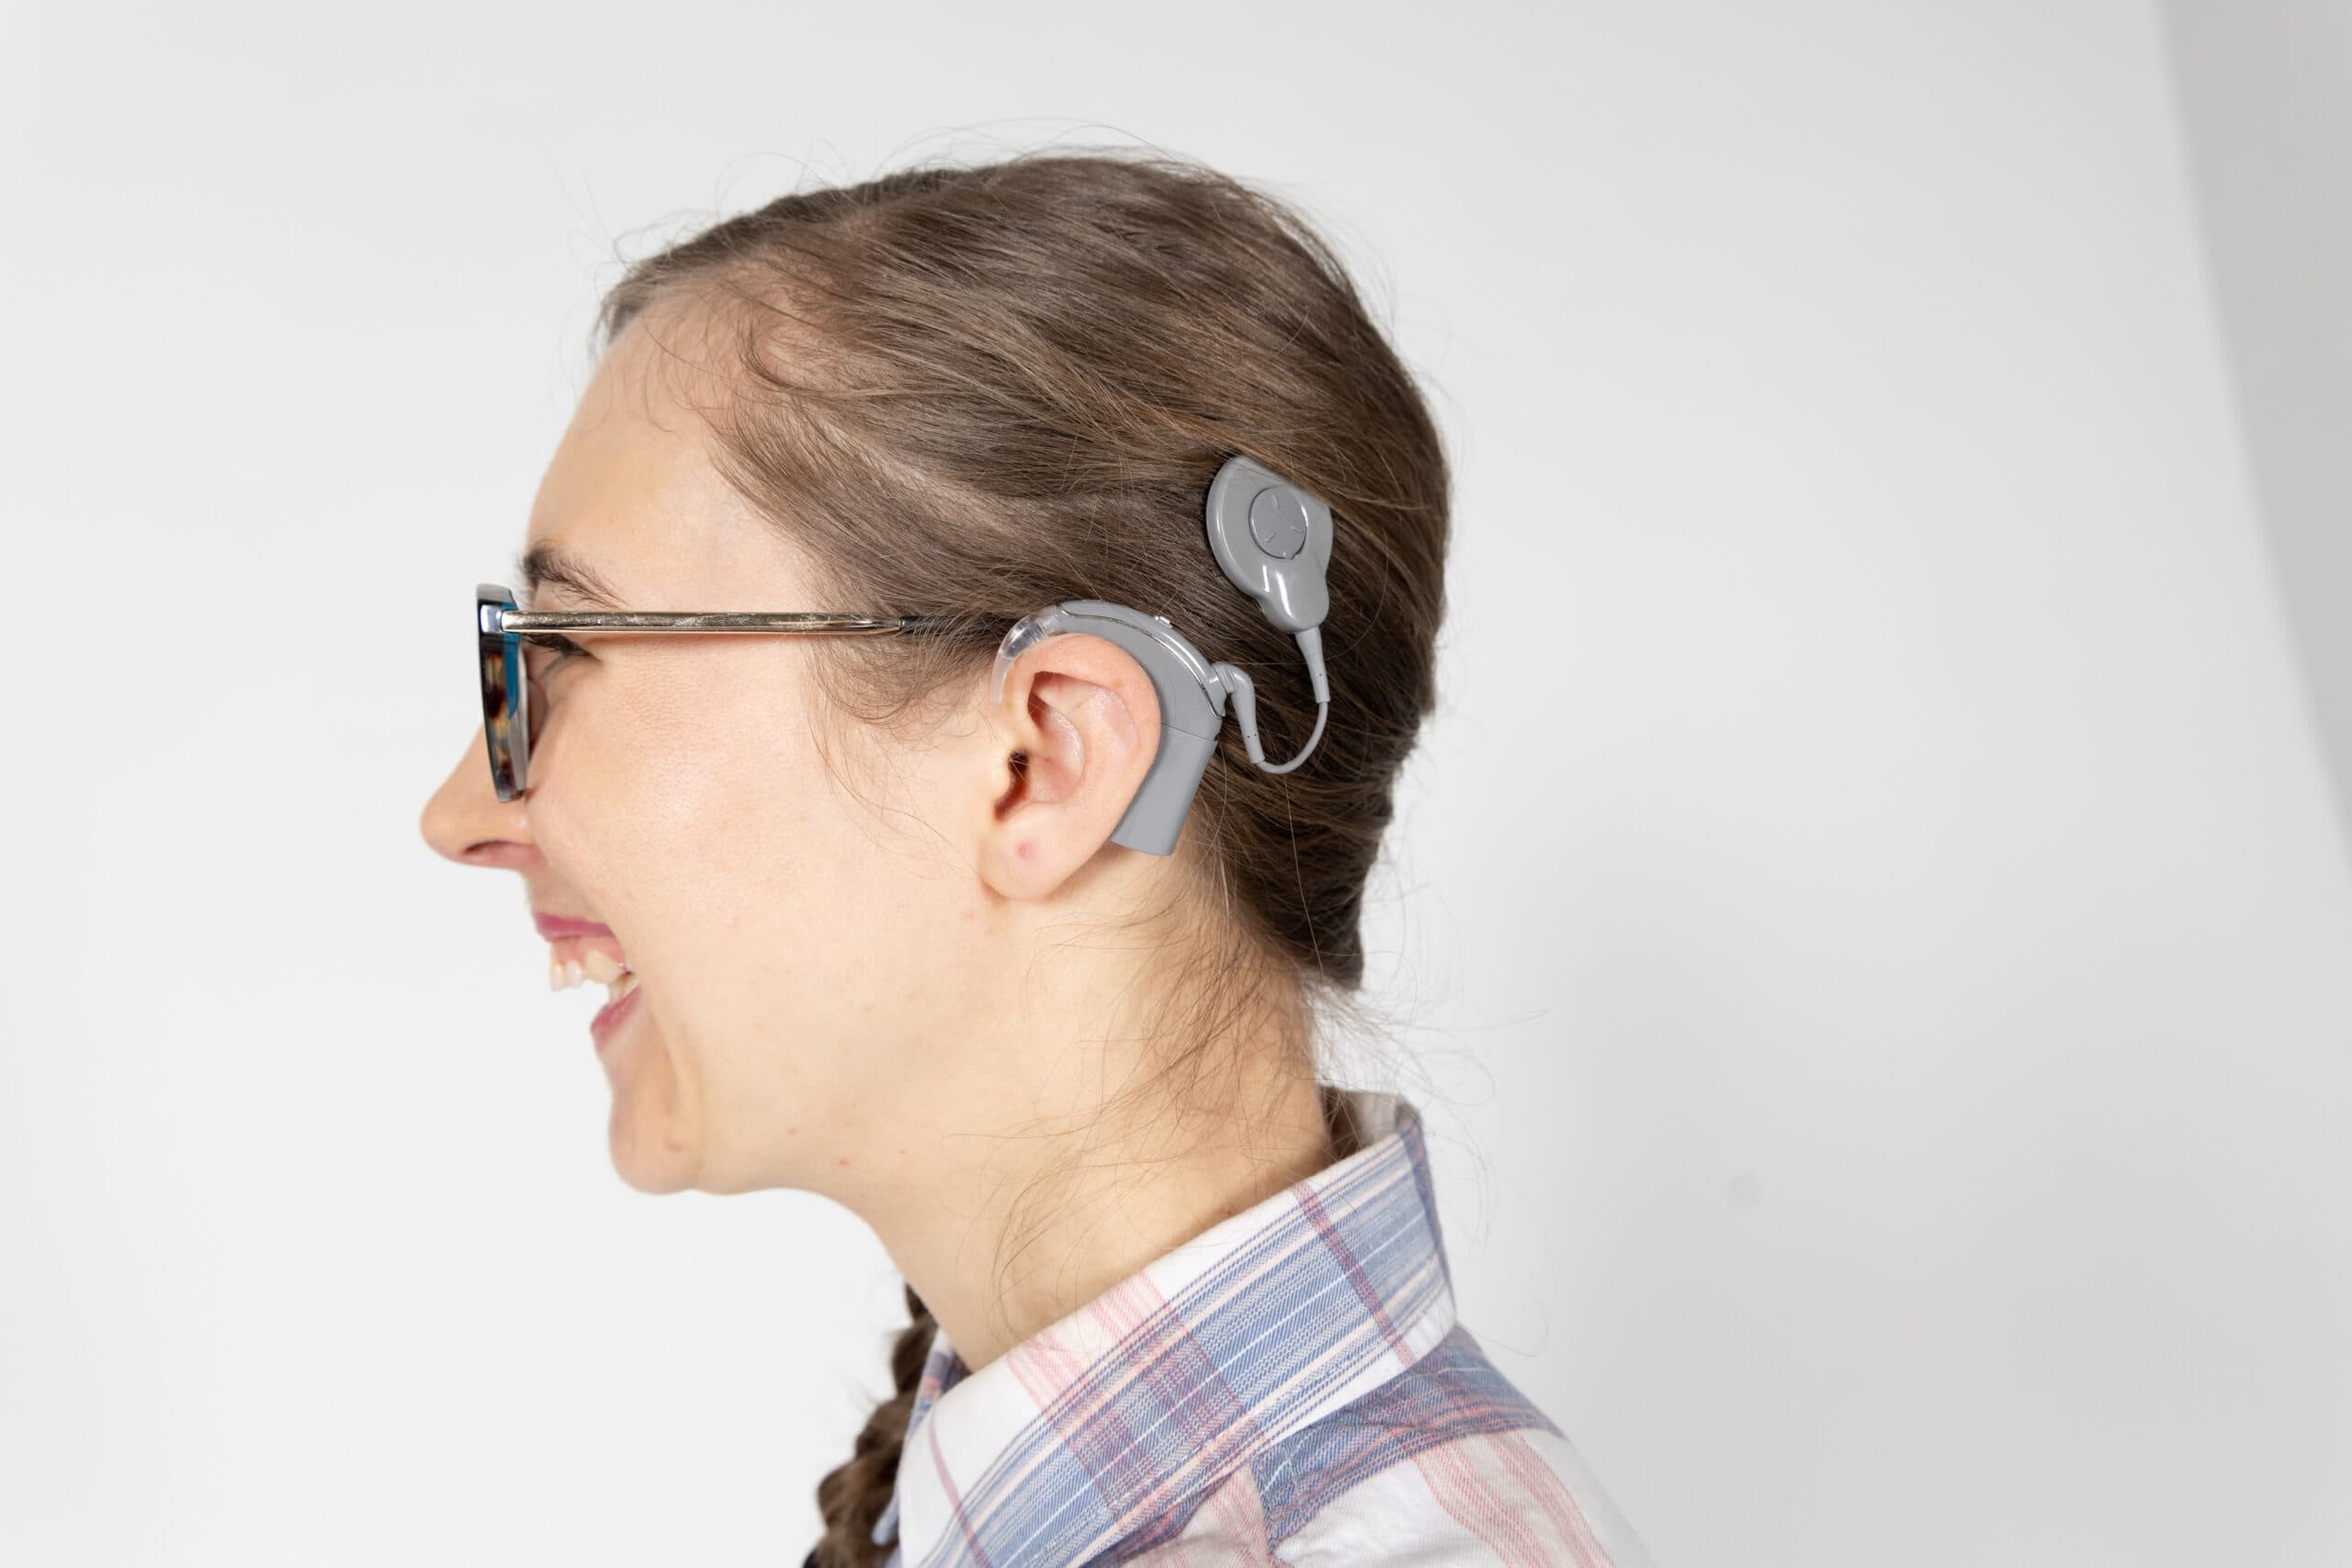 Deafblind client Savanagh faces the left hand side and showing her cochlear implant